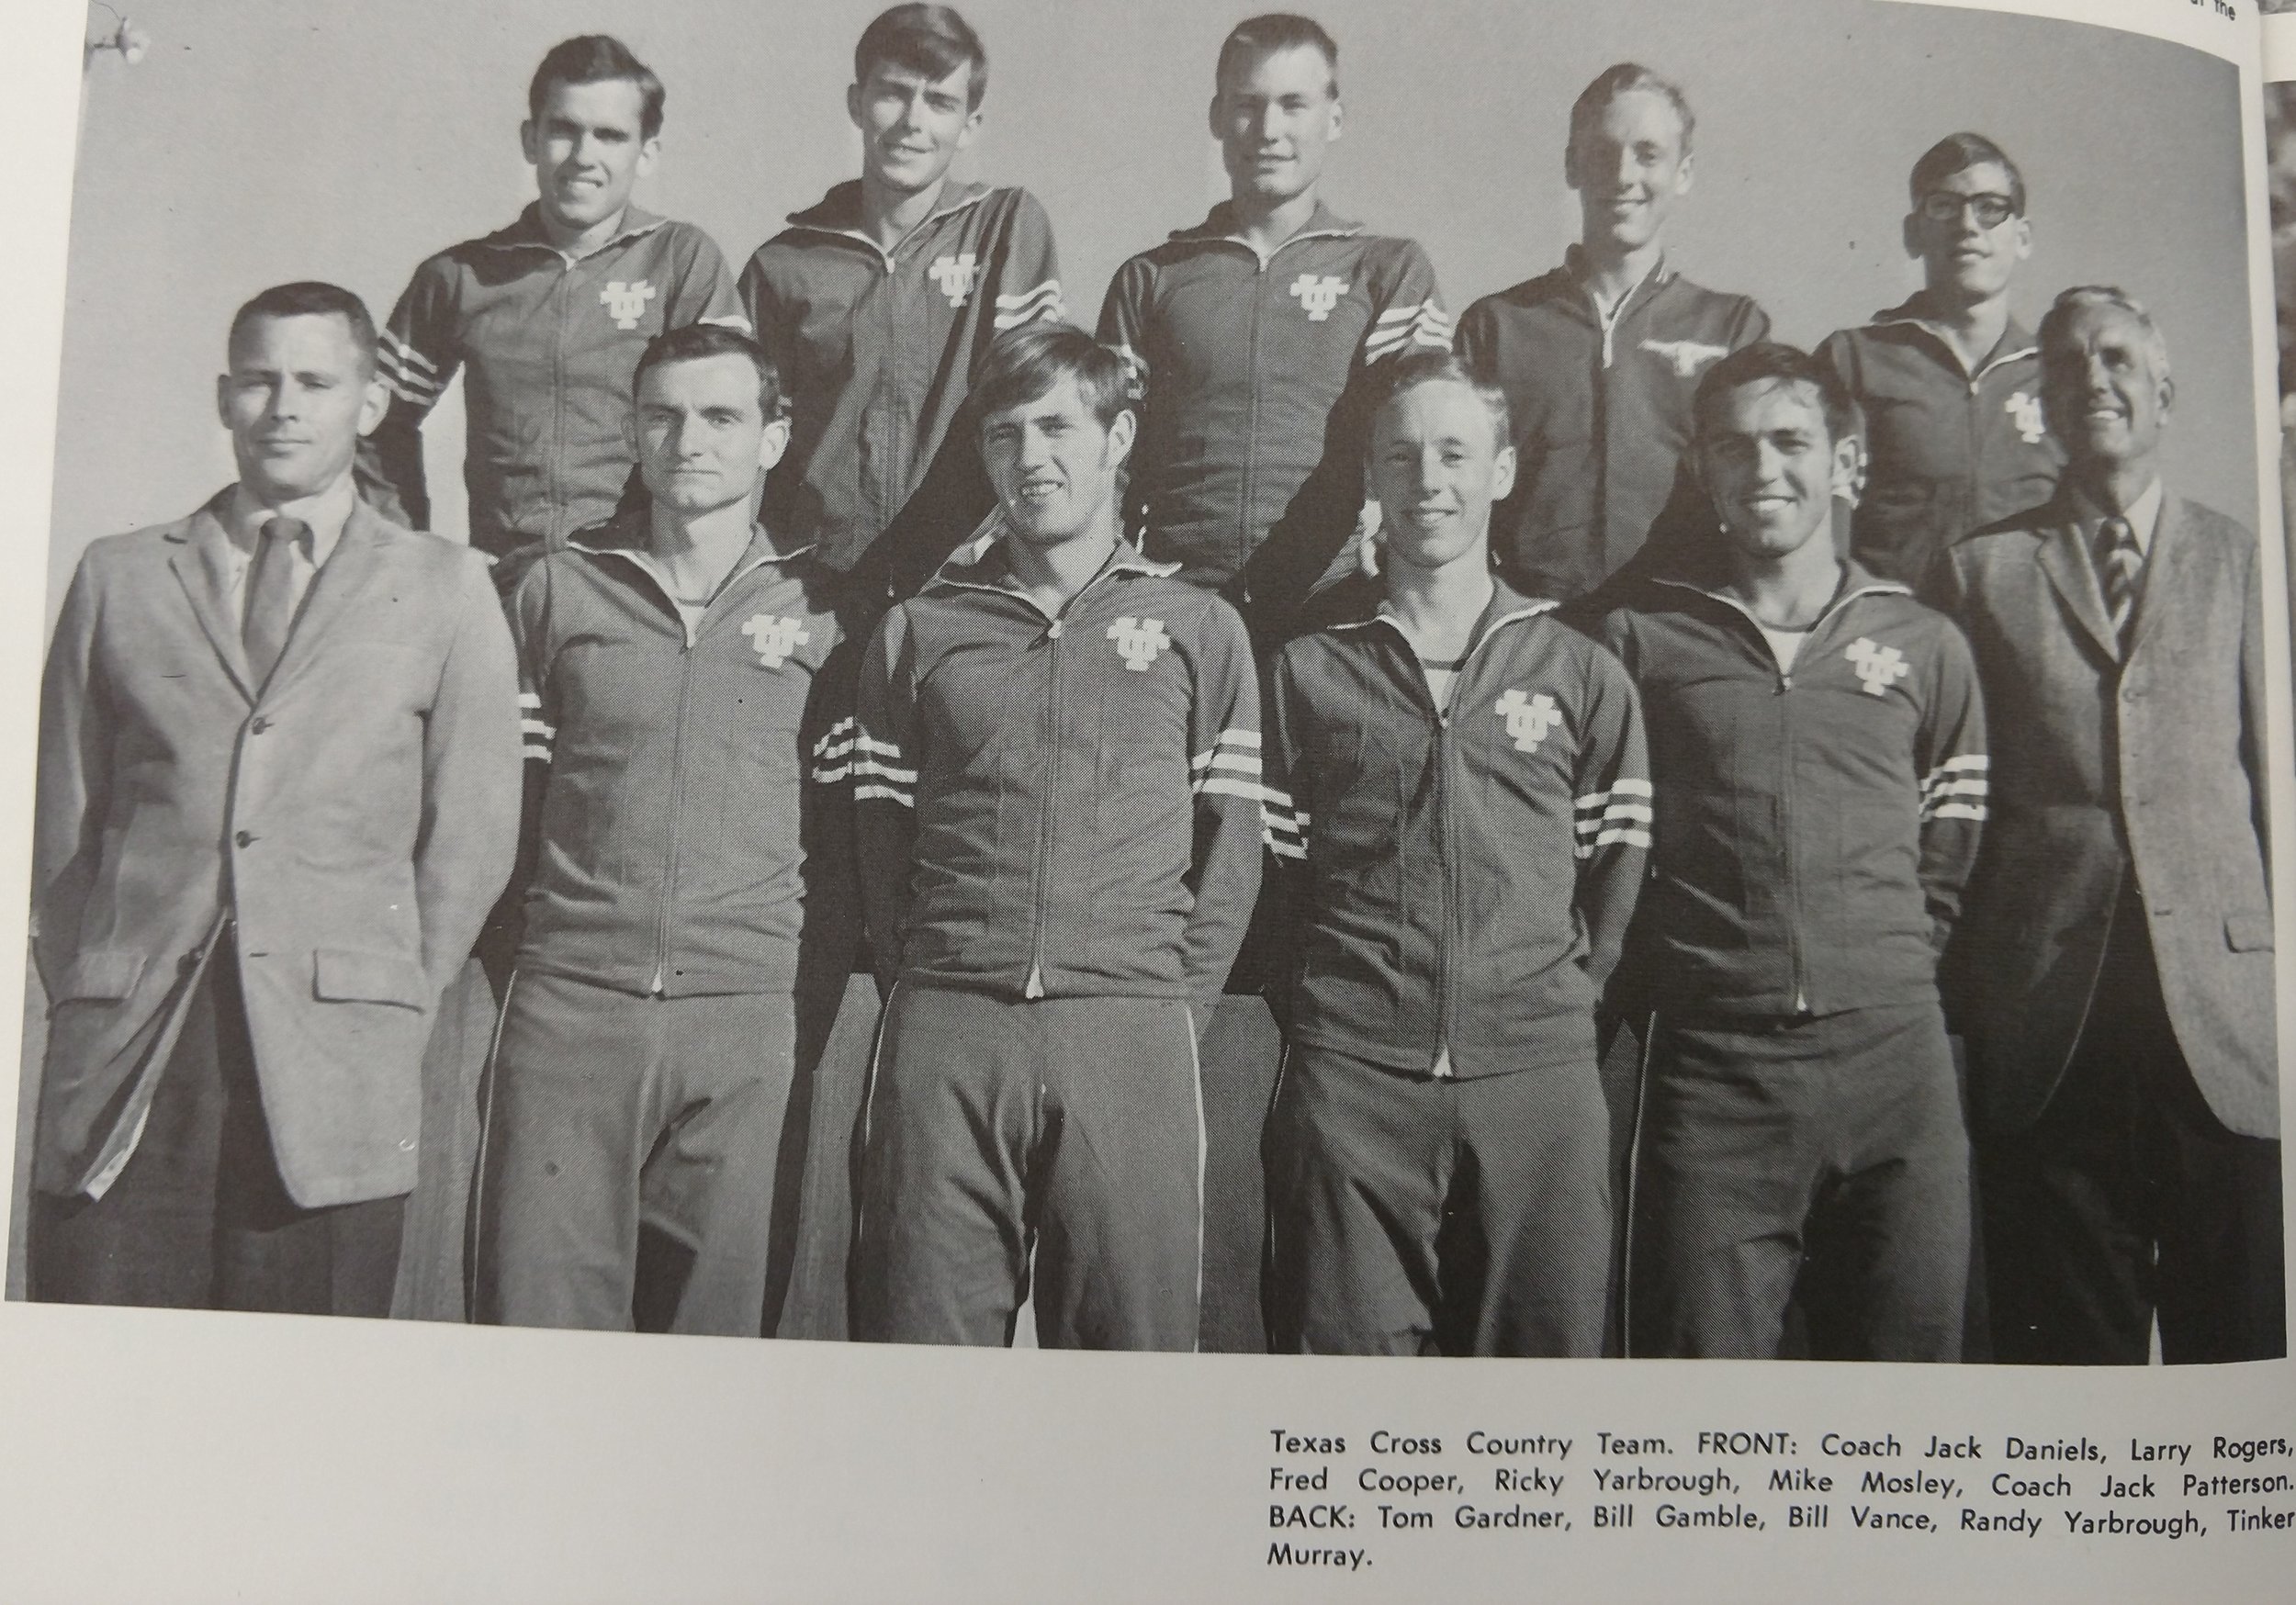  Front- Daniel, Rogers, Cooper, Ricky Yarbrough, Mosley, Patterson,  Gardner, Gamble, Vance, Randy Yarbrough, Murray 